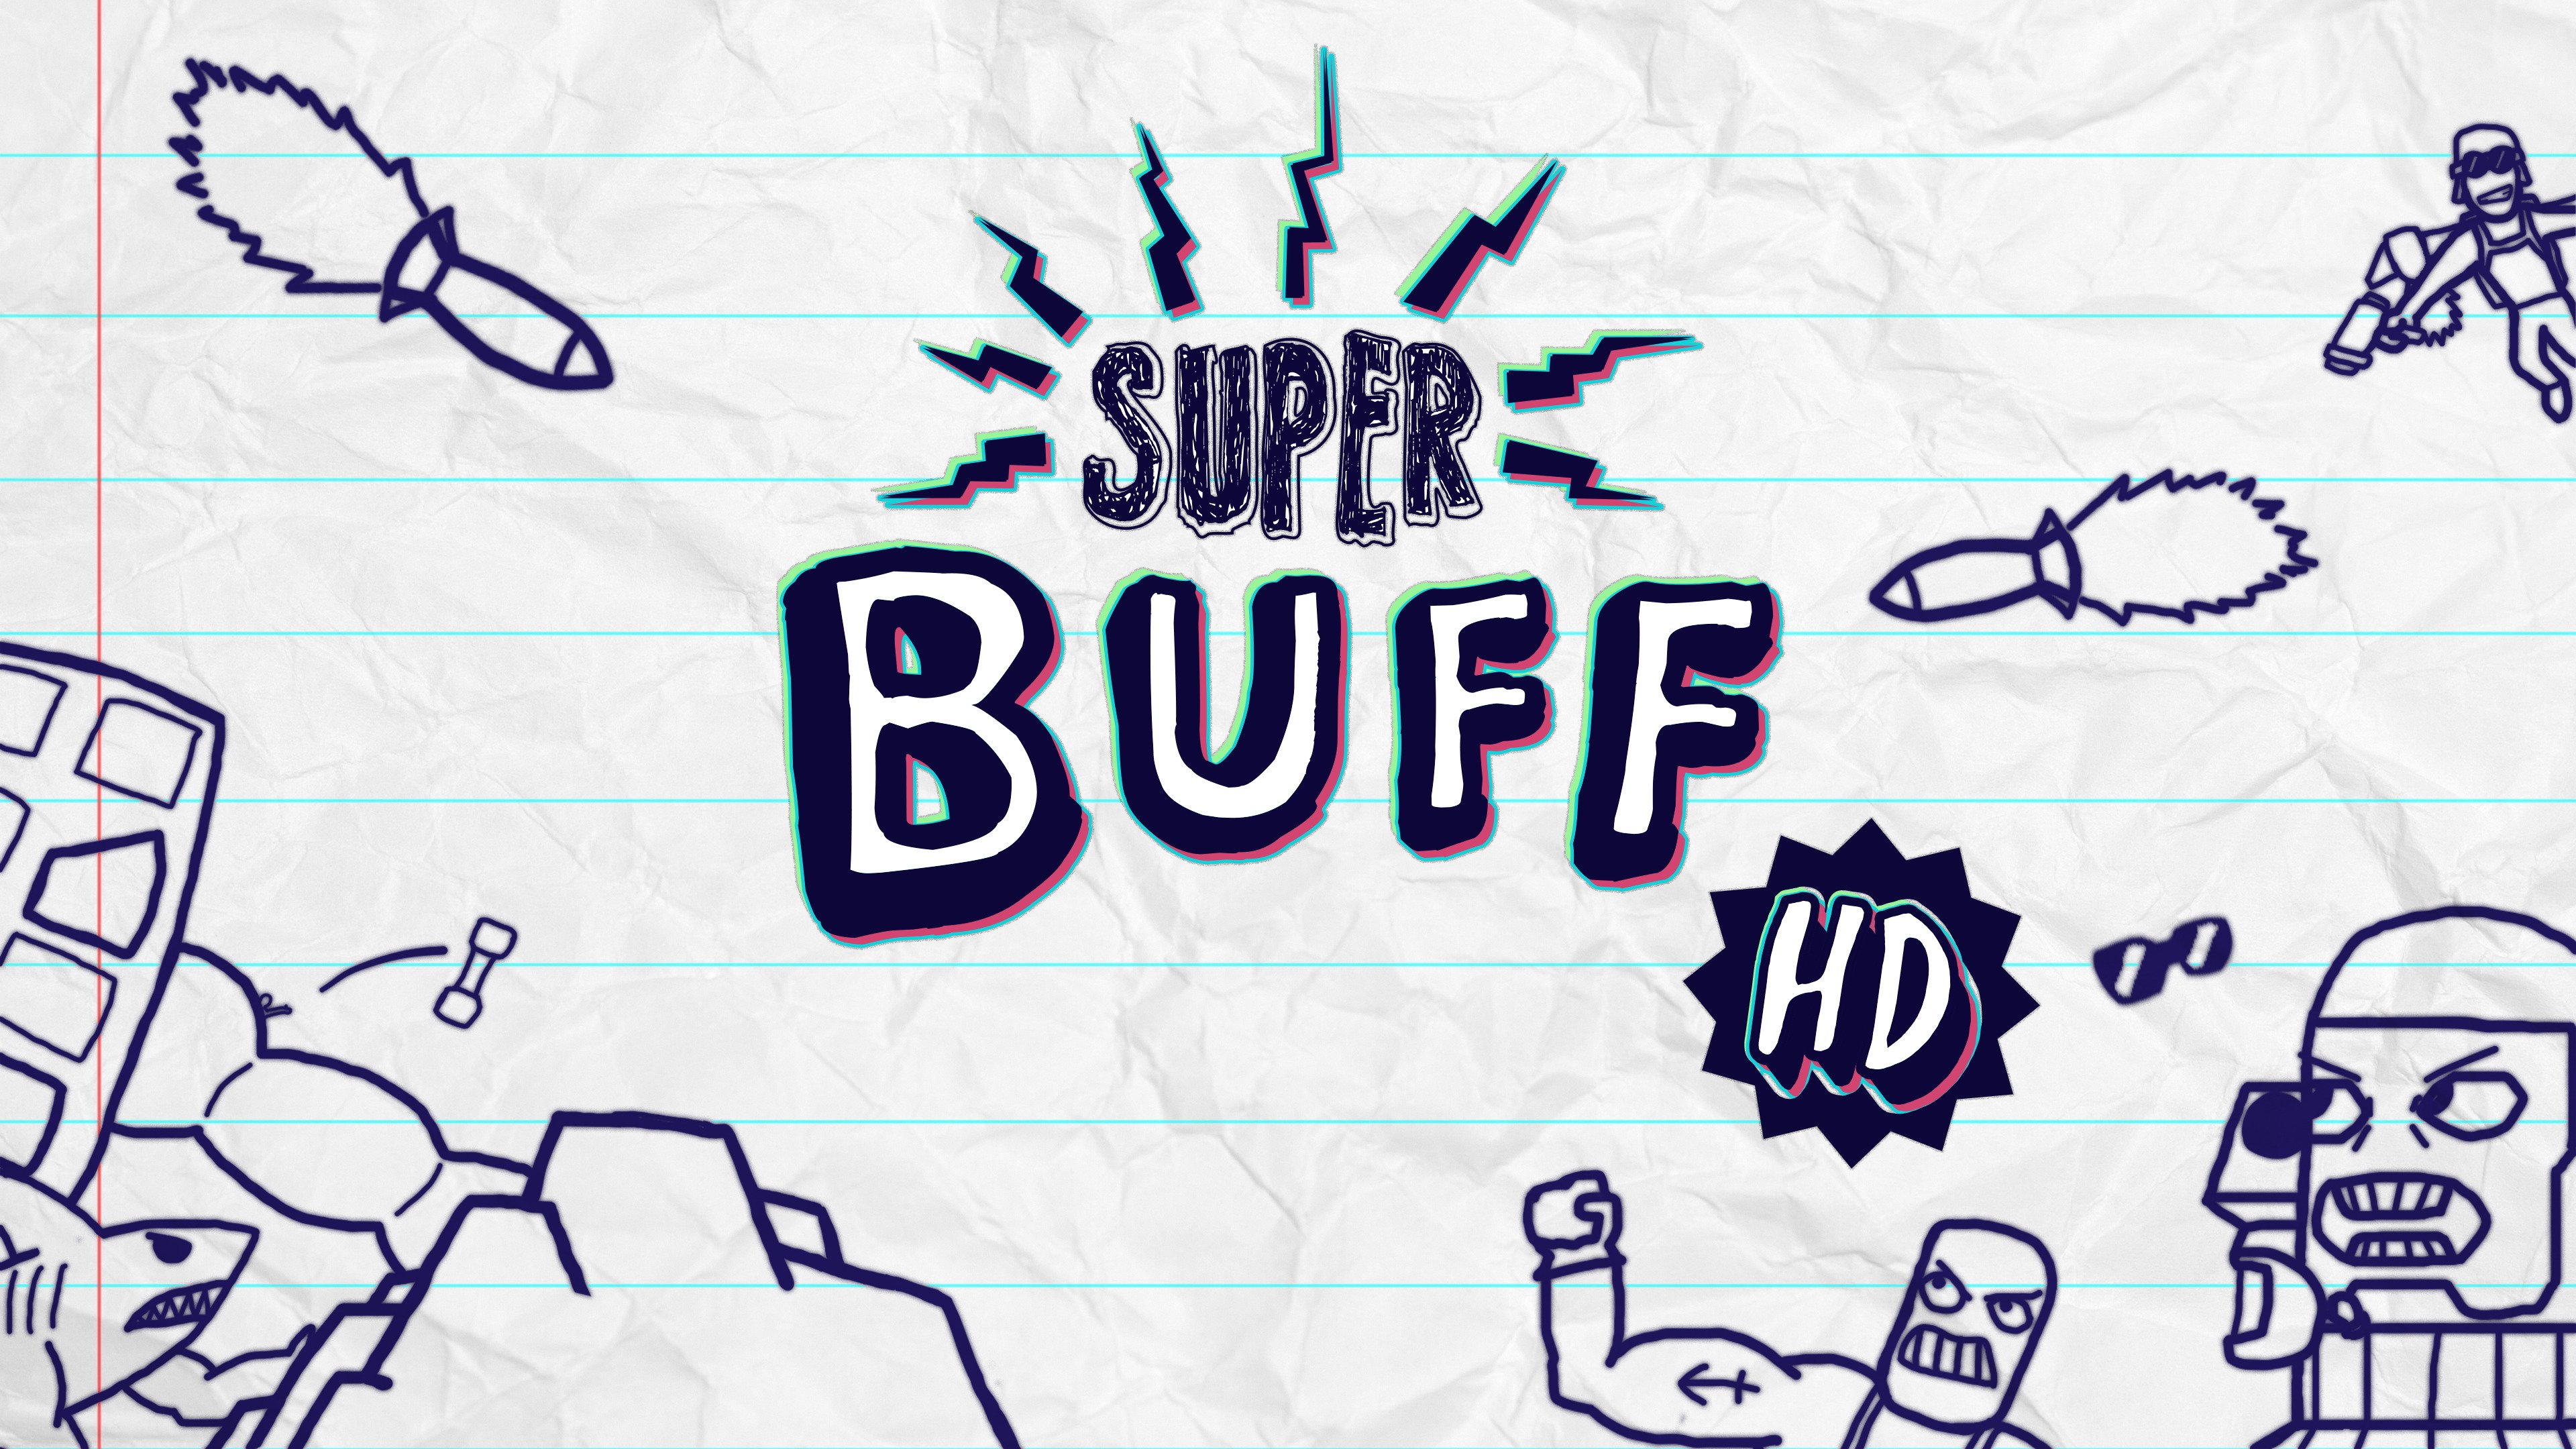 #
      Fast-paced first-person shooter Super Buff HD announced for PS5, Xbox Series, PS4, Xbox One, Switch, and PC